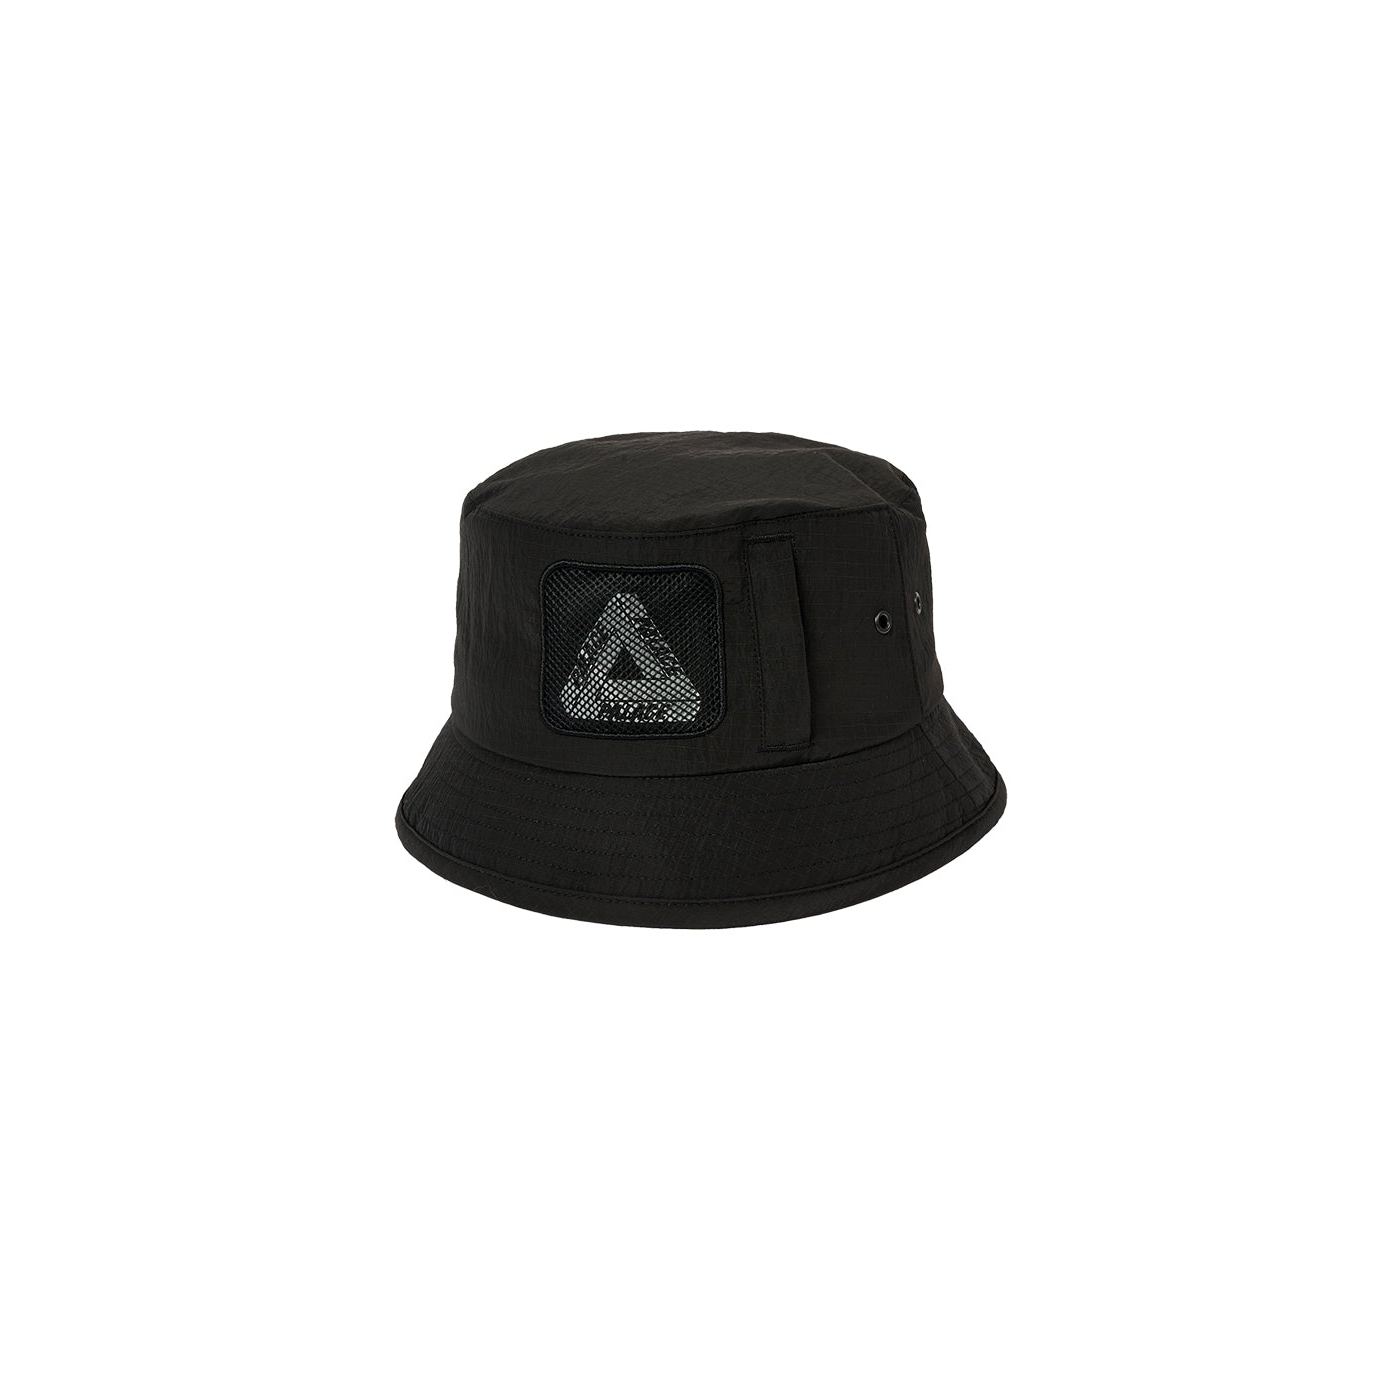 Thumbnail Y-RIPSTOP SHELL BUCKET BLACK one color